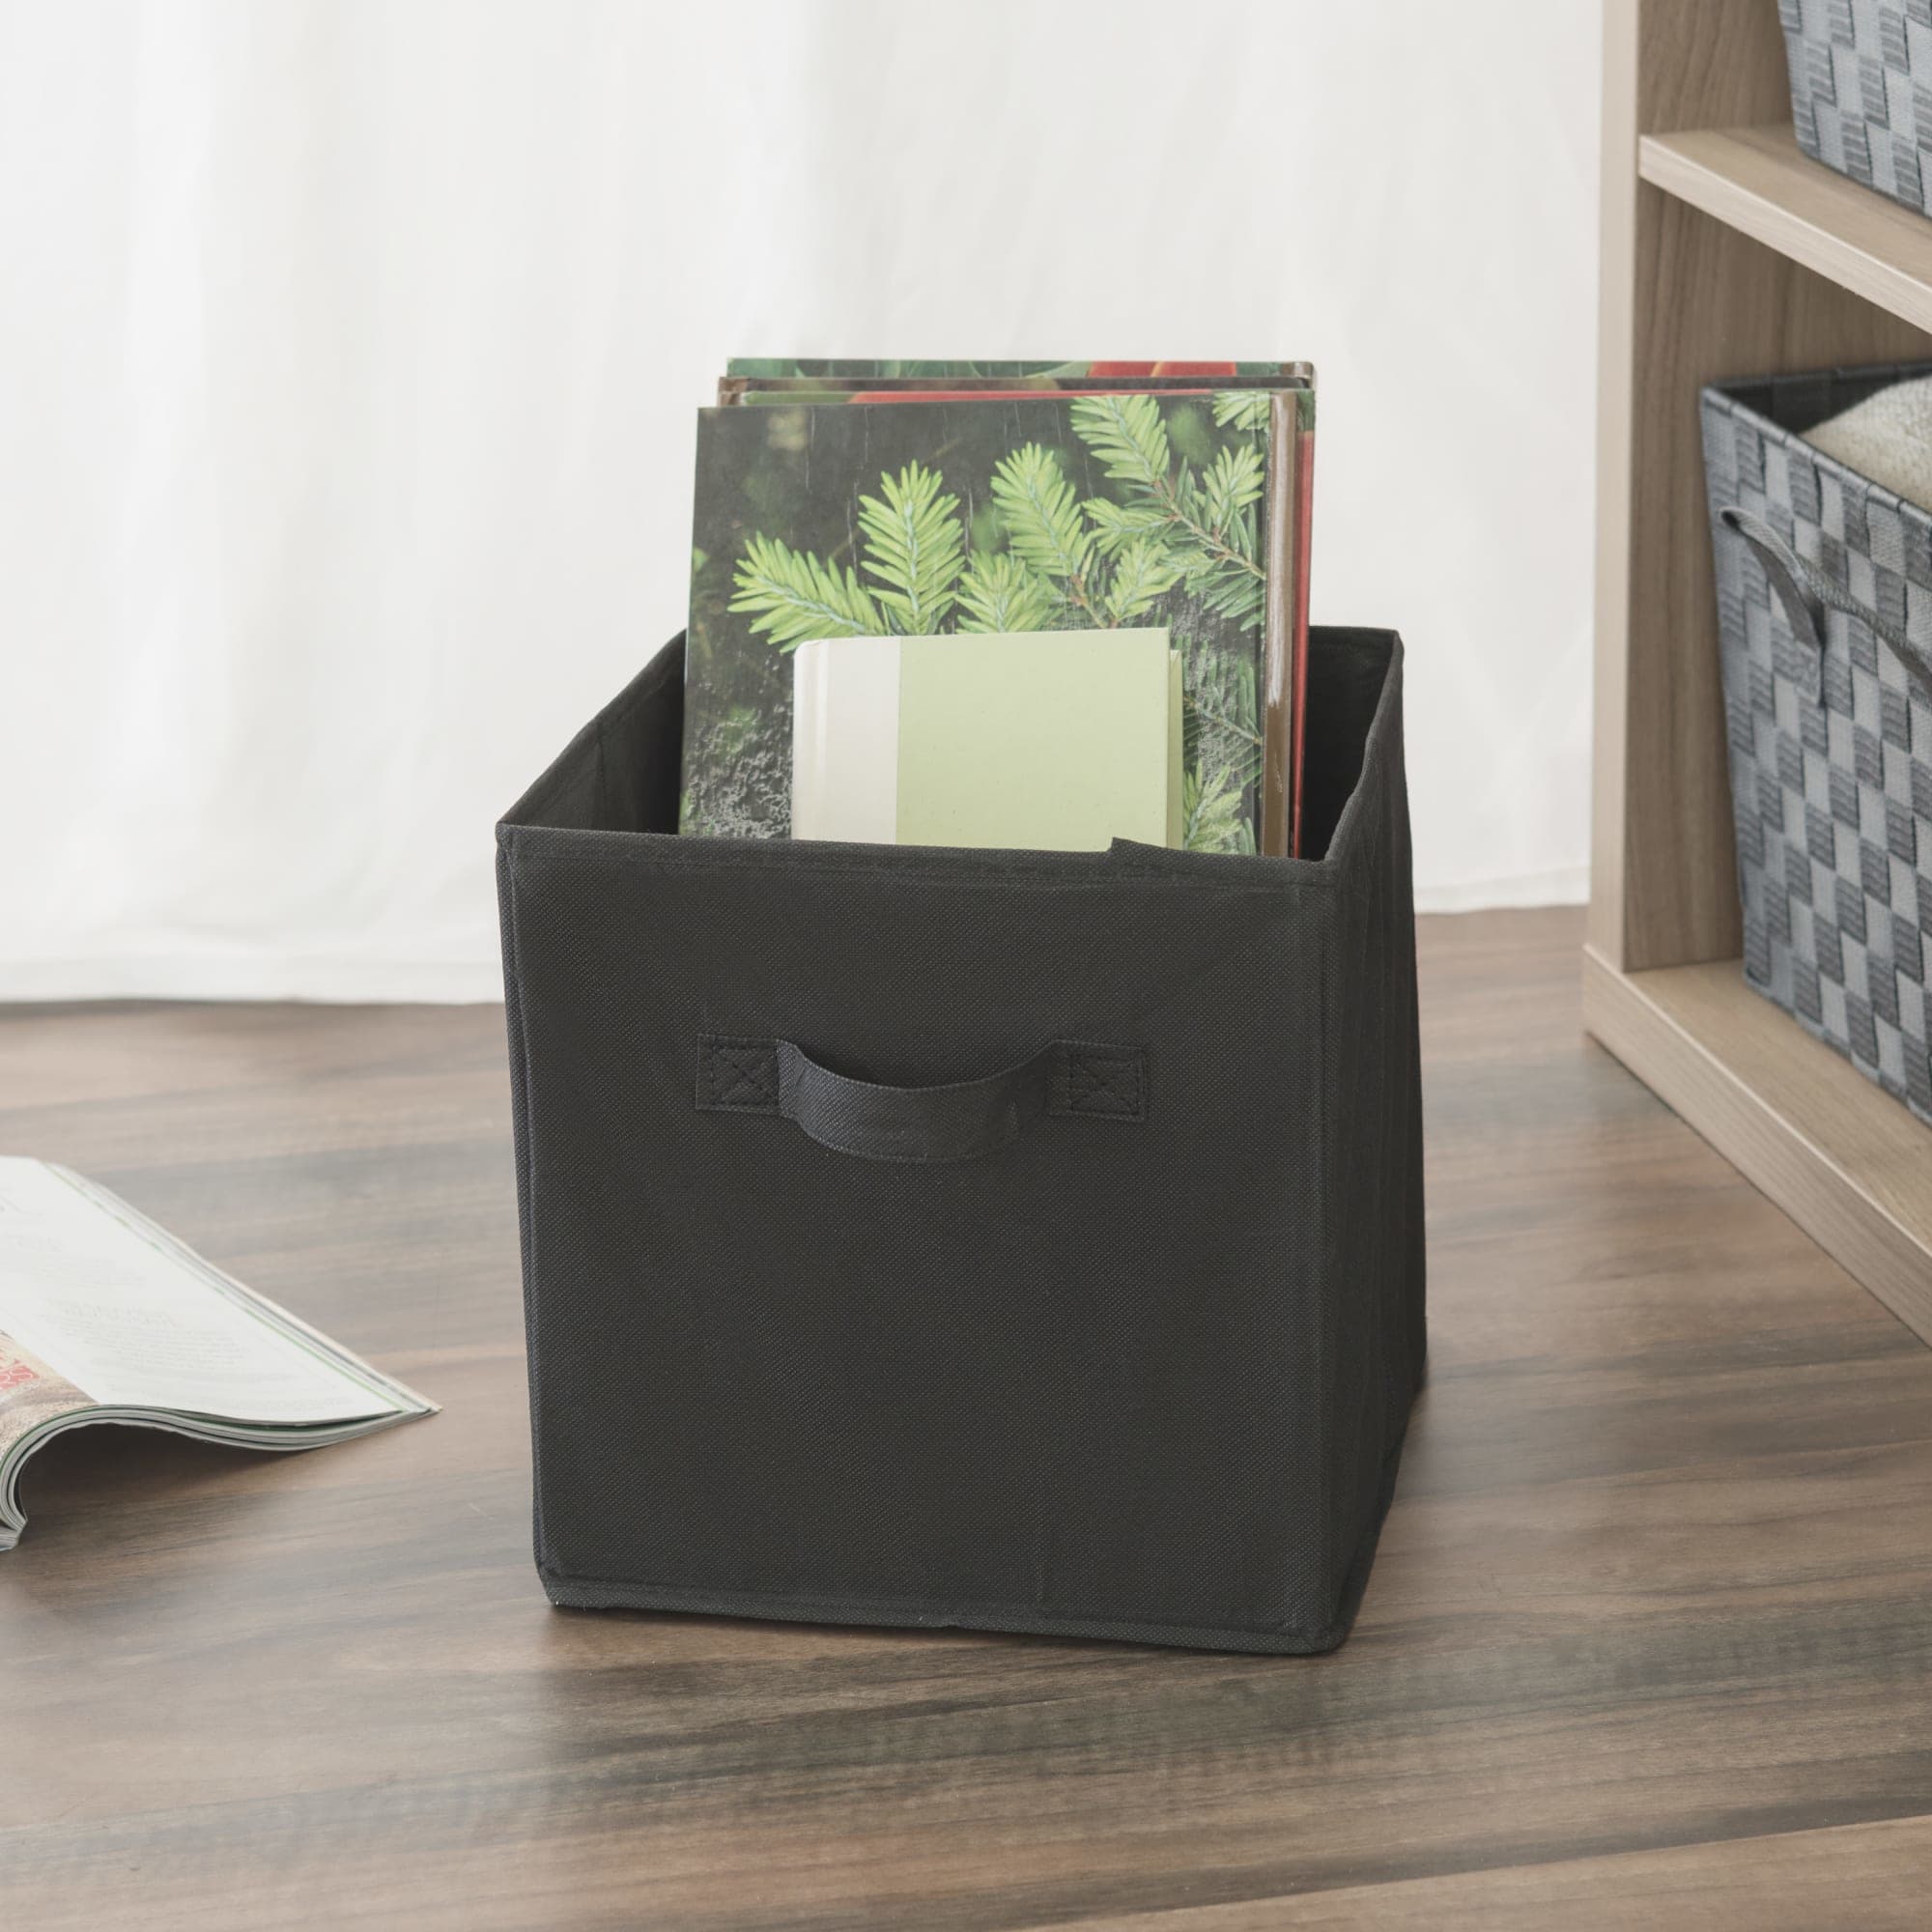 Home Basics Collapsible and Foldable Non-Woven Storage Cube, Black $3.00 EACH, CASE PACK OF 12